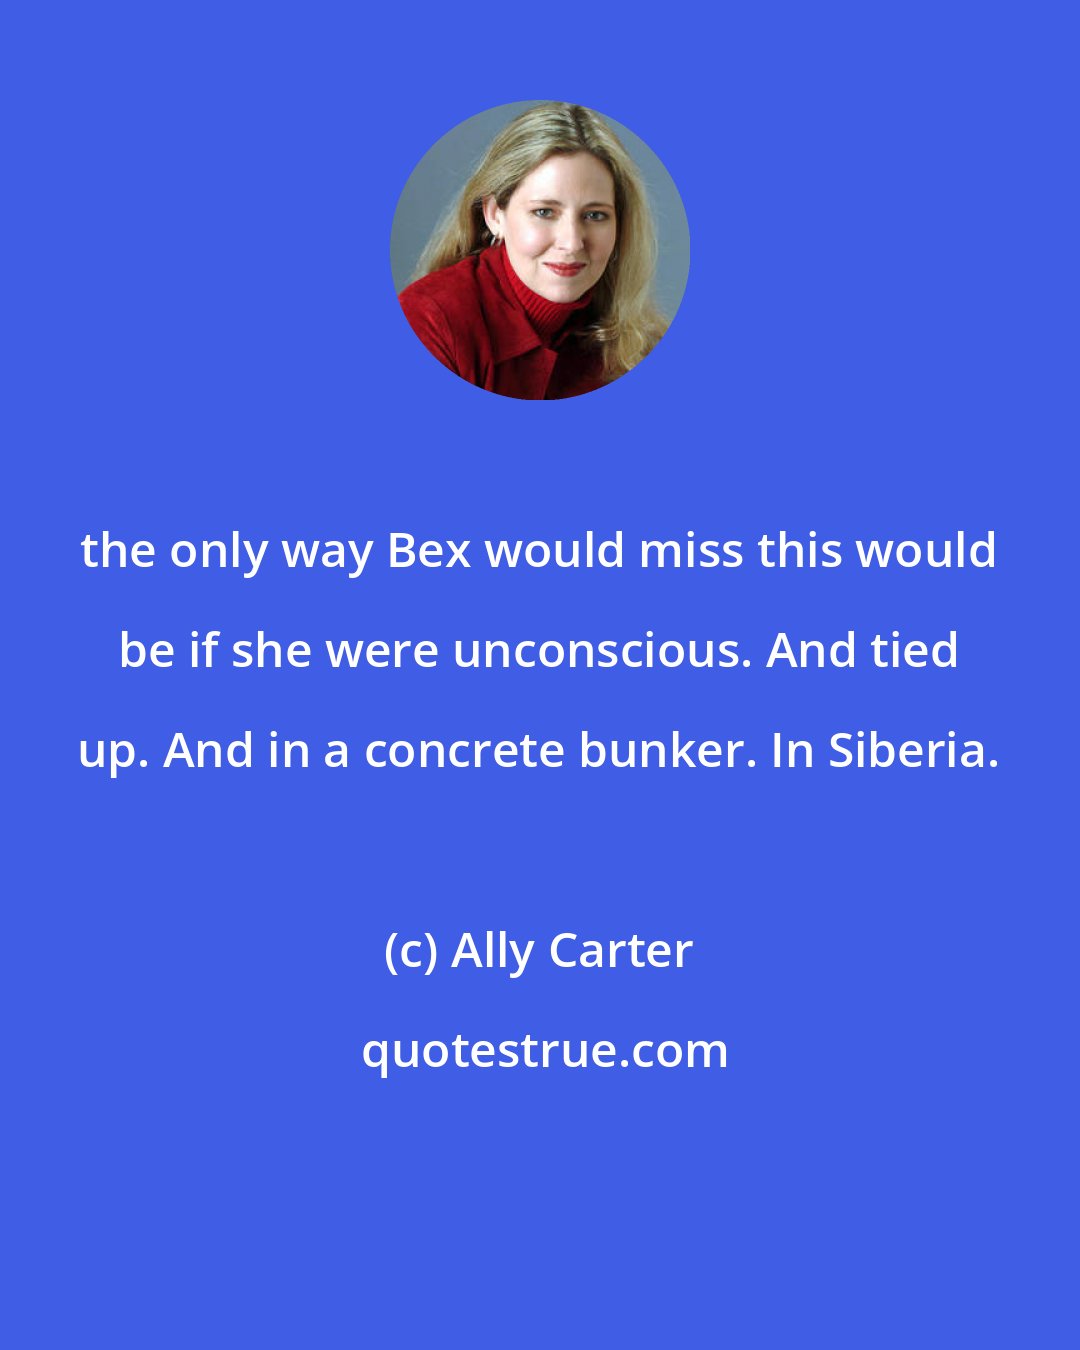 Ally Carter: the only way Bex would miss this would be if she were unconscious. And tied up. And in a concrete bunker. In Siberia.